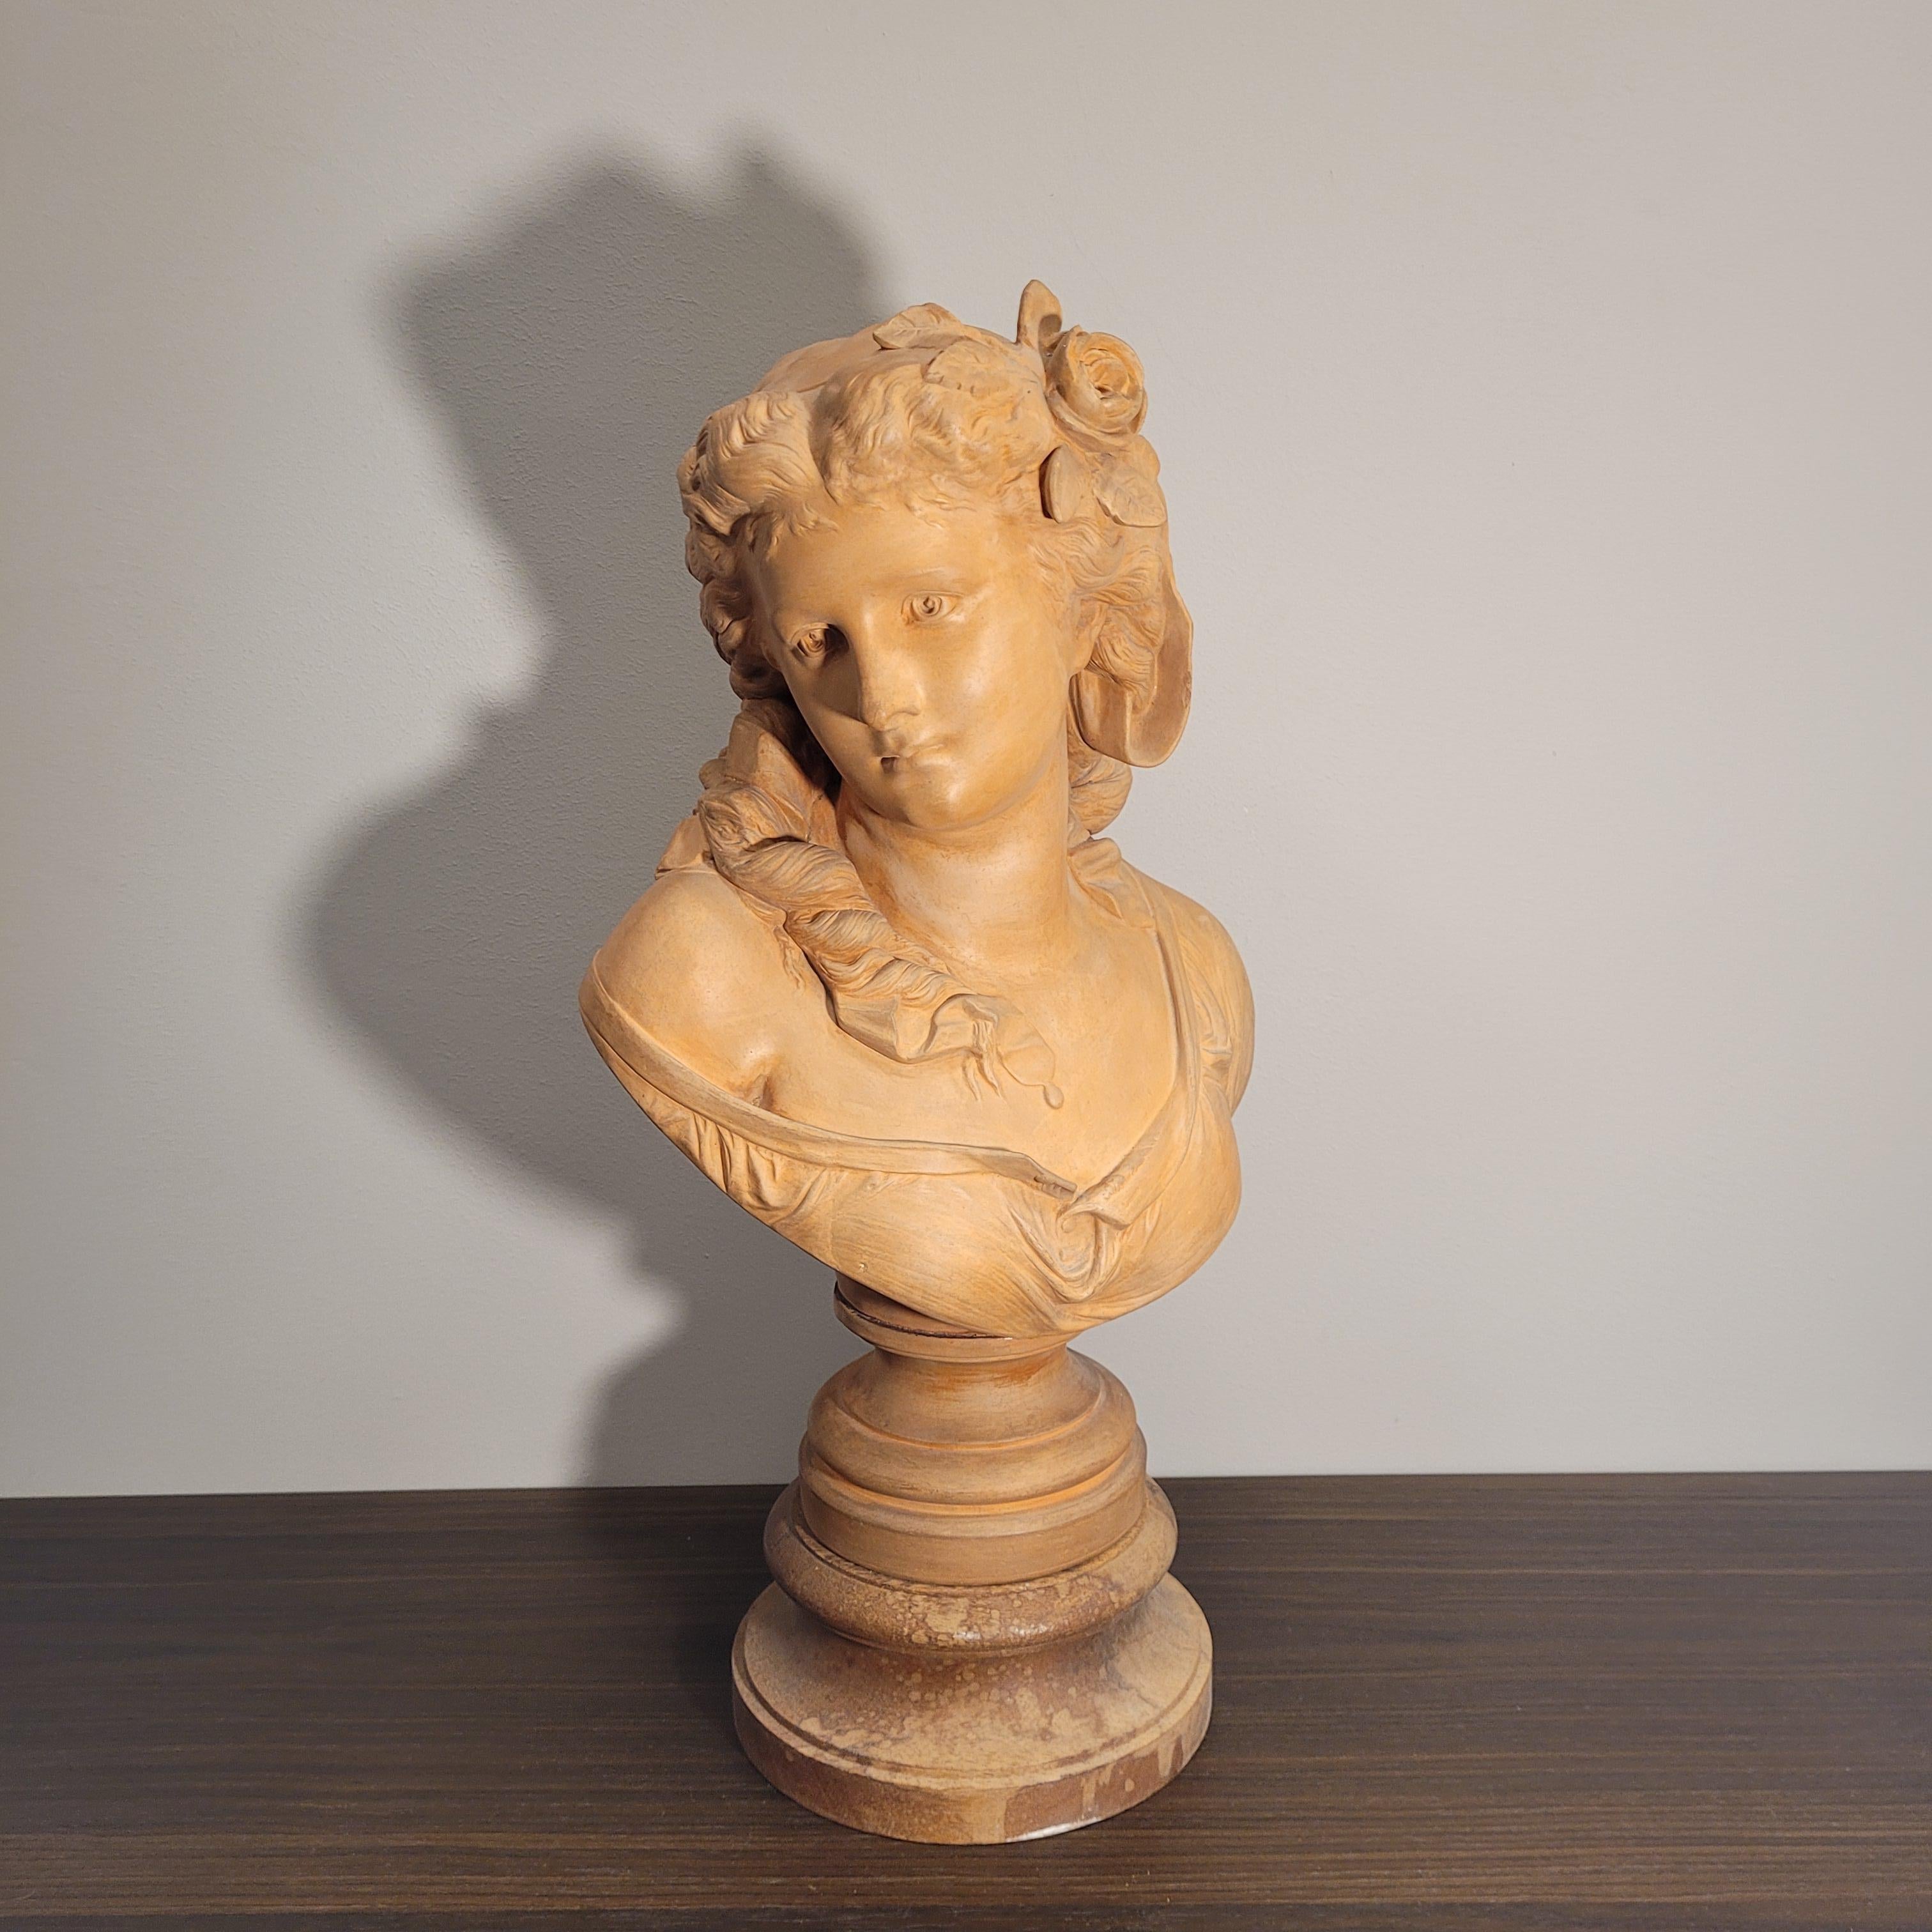 One of a kind  female bust in terracotta, signed A. Carrier on the back. Seated on a wooden base we find this delicate bust of a young woman, with sweet and delicate features. With her face turned to one side of her, the softness of her complexion